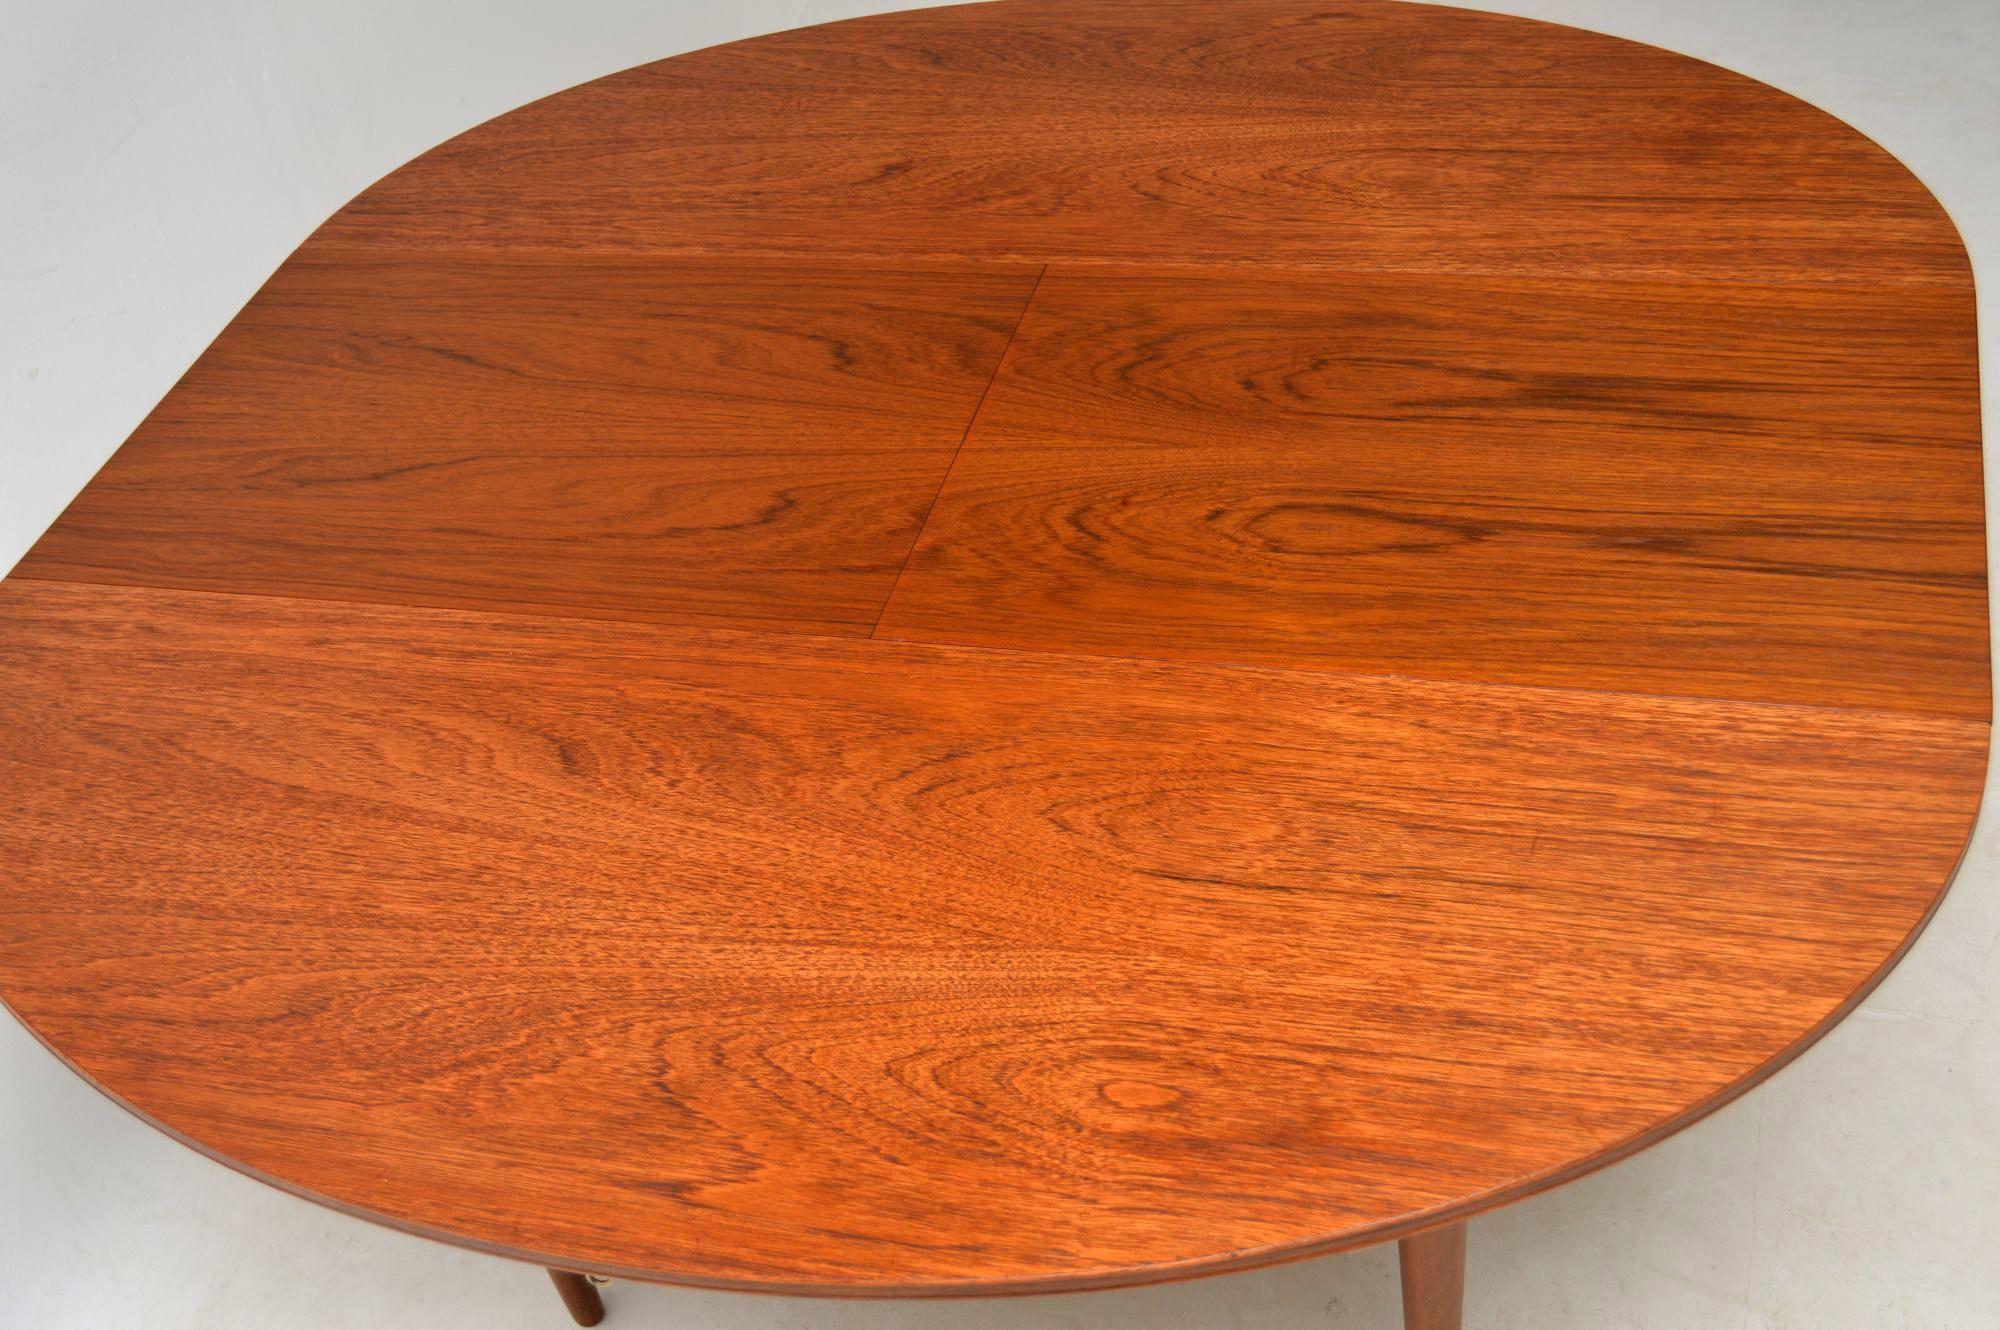 20th Century 1960's Teak Dining Table and 6 Chairs by Greaves & Thomas